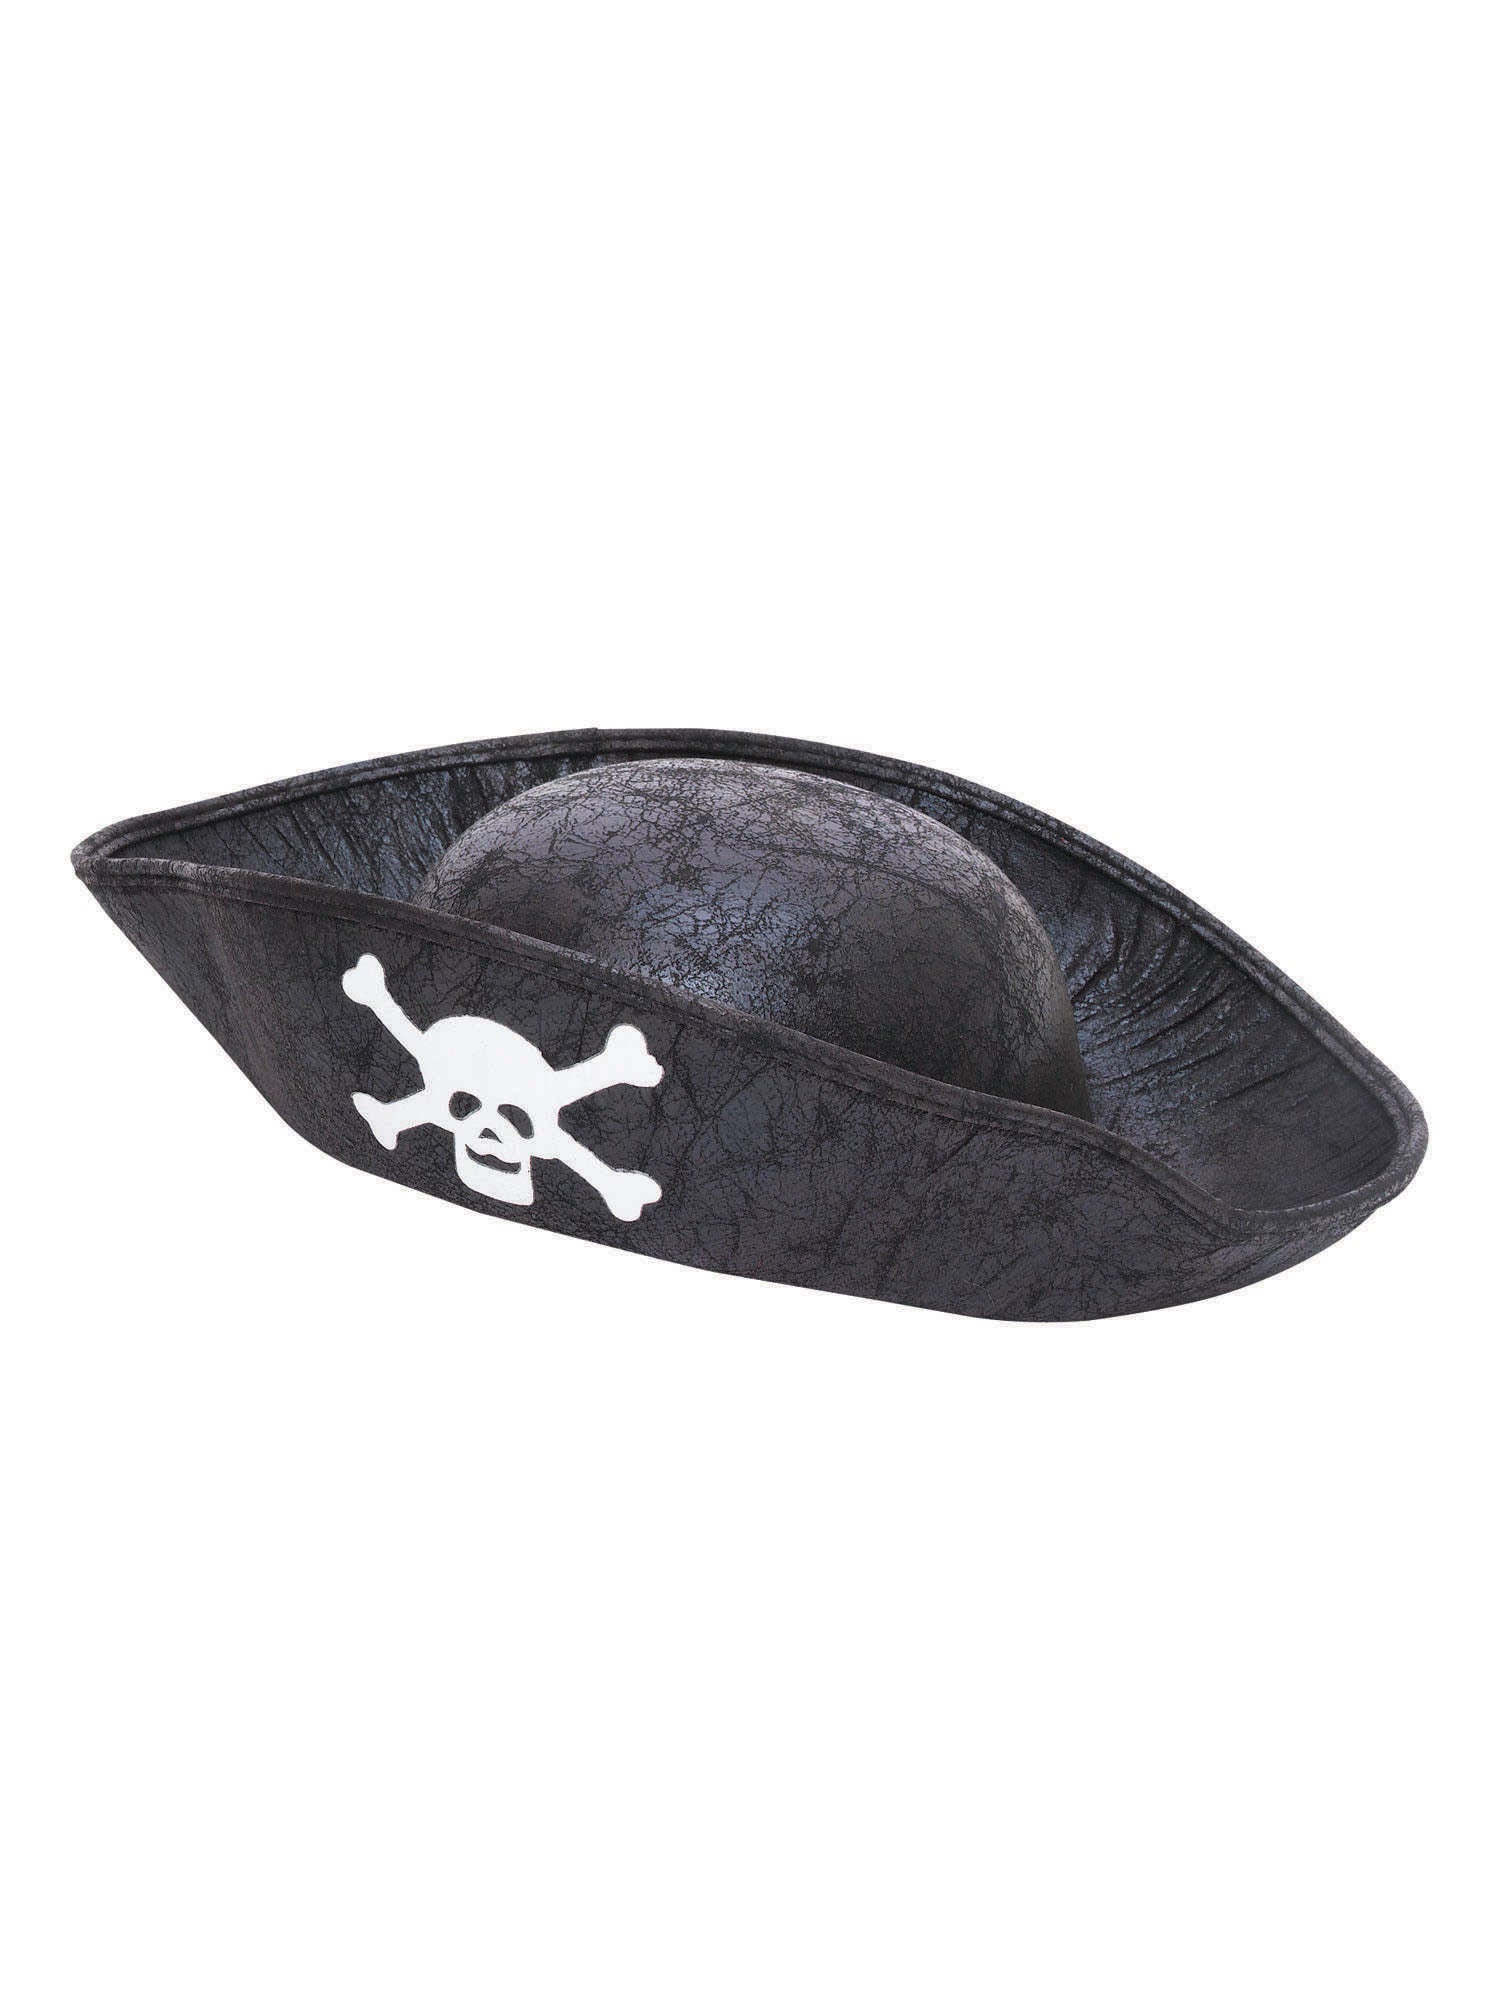 Pirate, multi-colored, Generic, Hat, Childs, Front